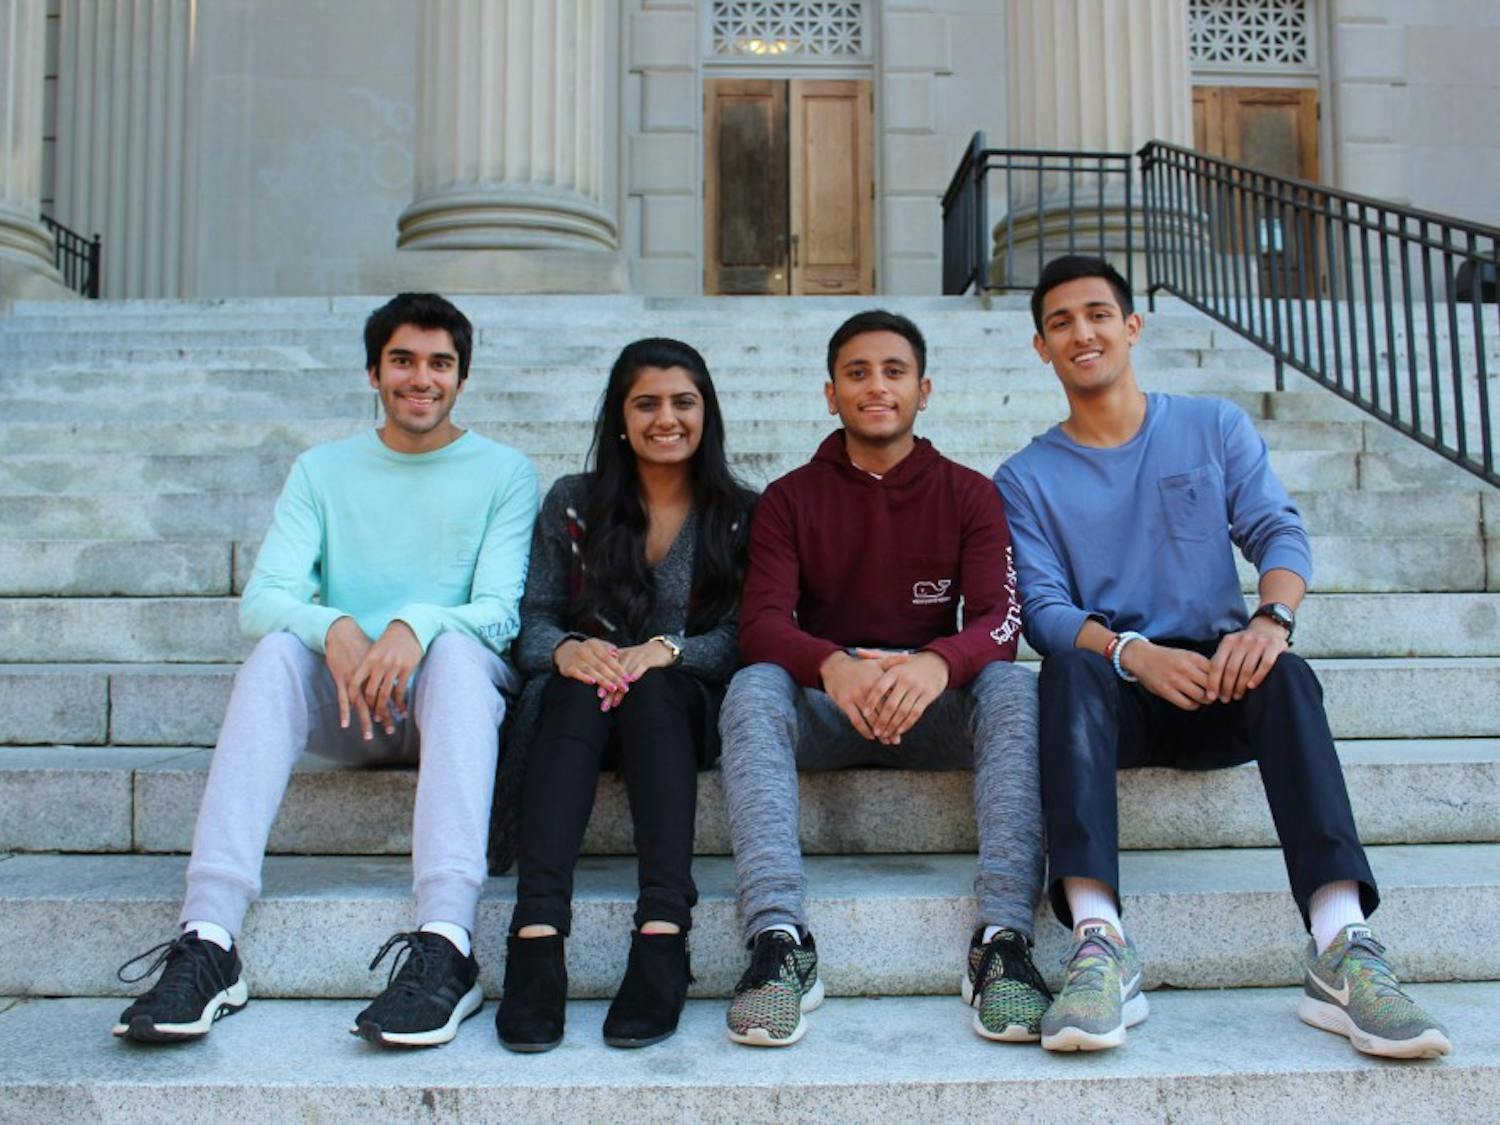 Nikhil Sachdeva, Khushbu Patel, Kishan Patel and Sahil Vasa (From left to right) of the executive board of Sangam, a South Asian student organization at UNC. Sangam will be hosting an event this Friday evening where students of the triangle area are invited to come dance in celebration of the Hindu festival, Navaratri. 